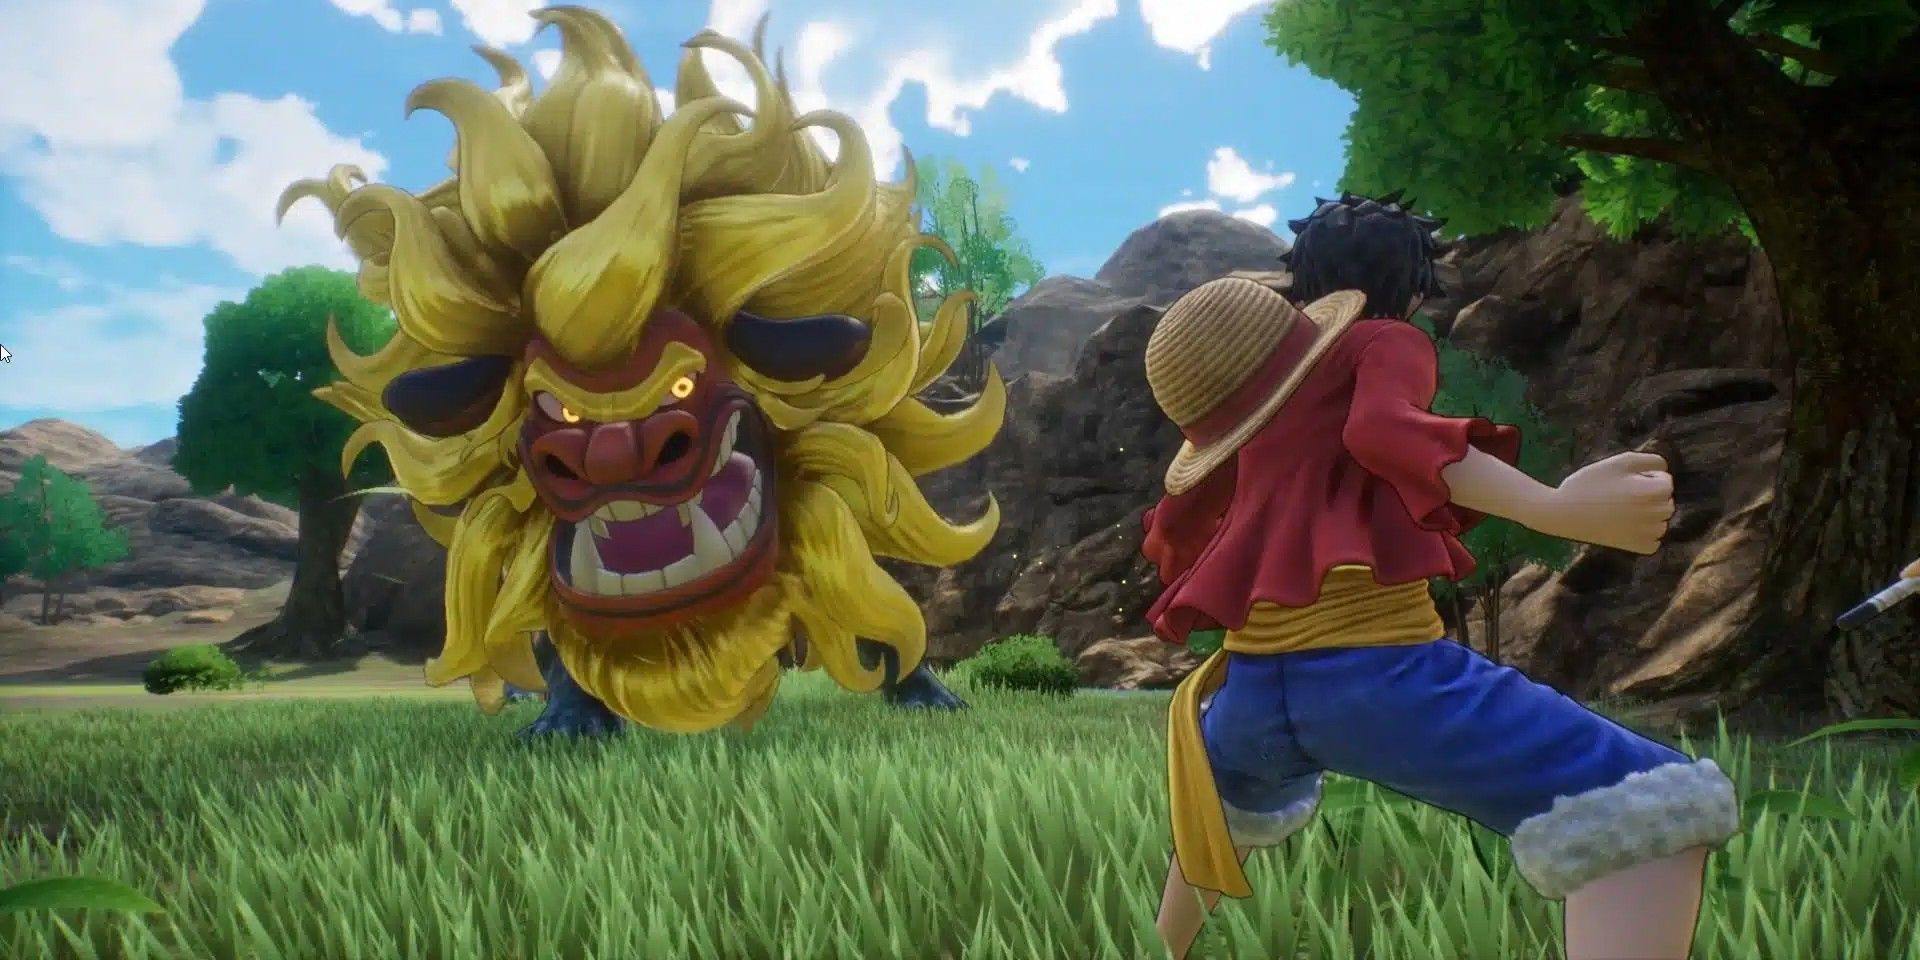 One Piece Odyssey's Luffy encountering a large lion-like monster.